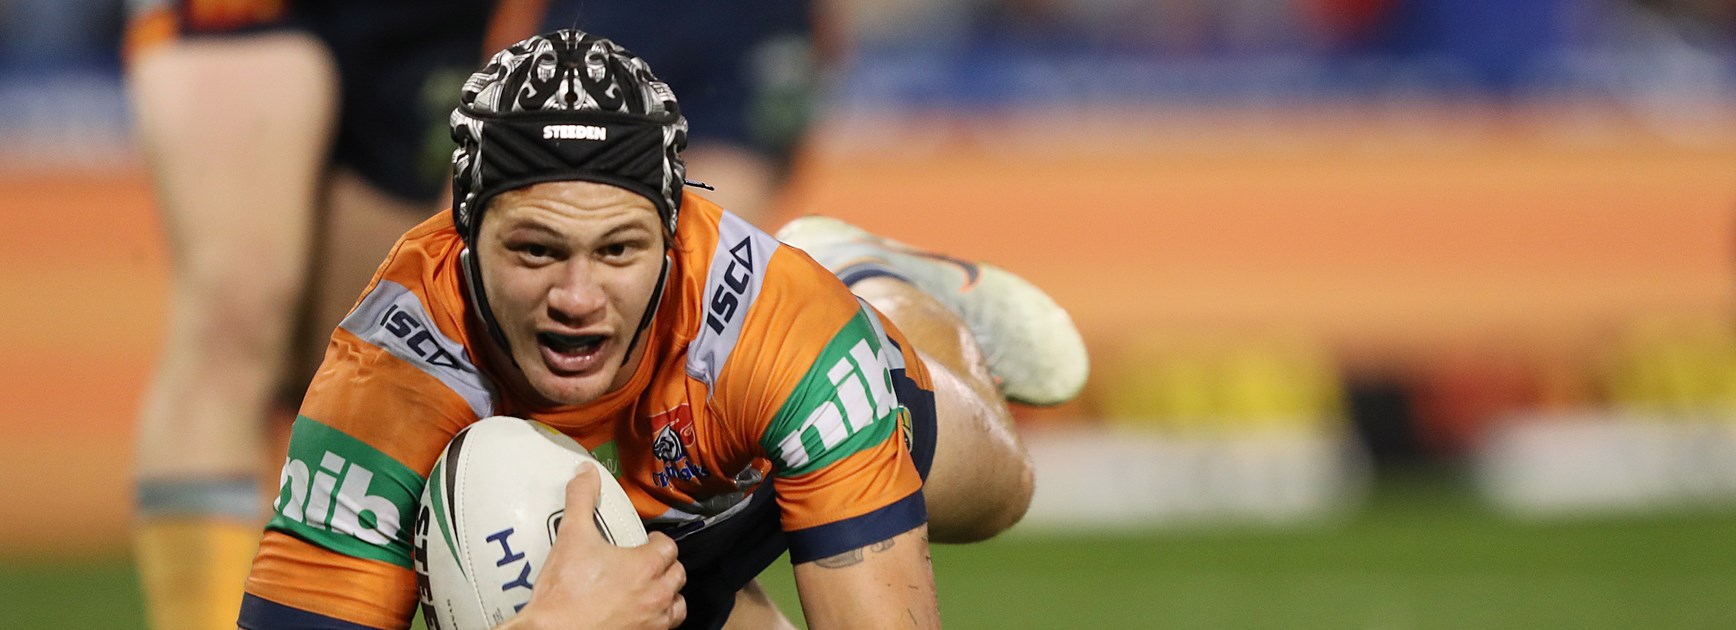 Five-eighth or fullback? Where Ponga wants to play